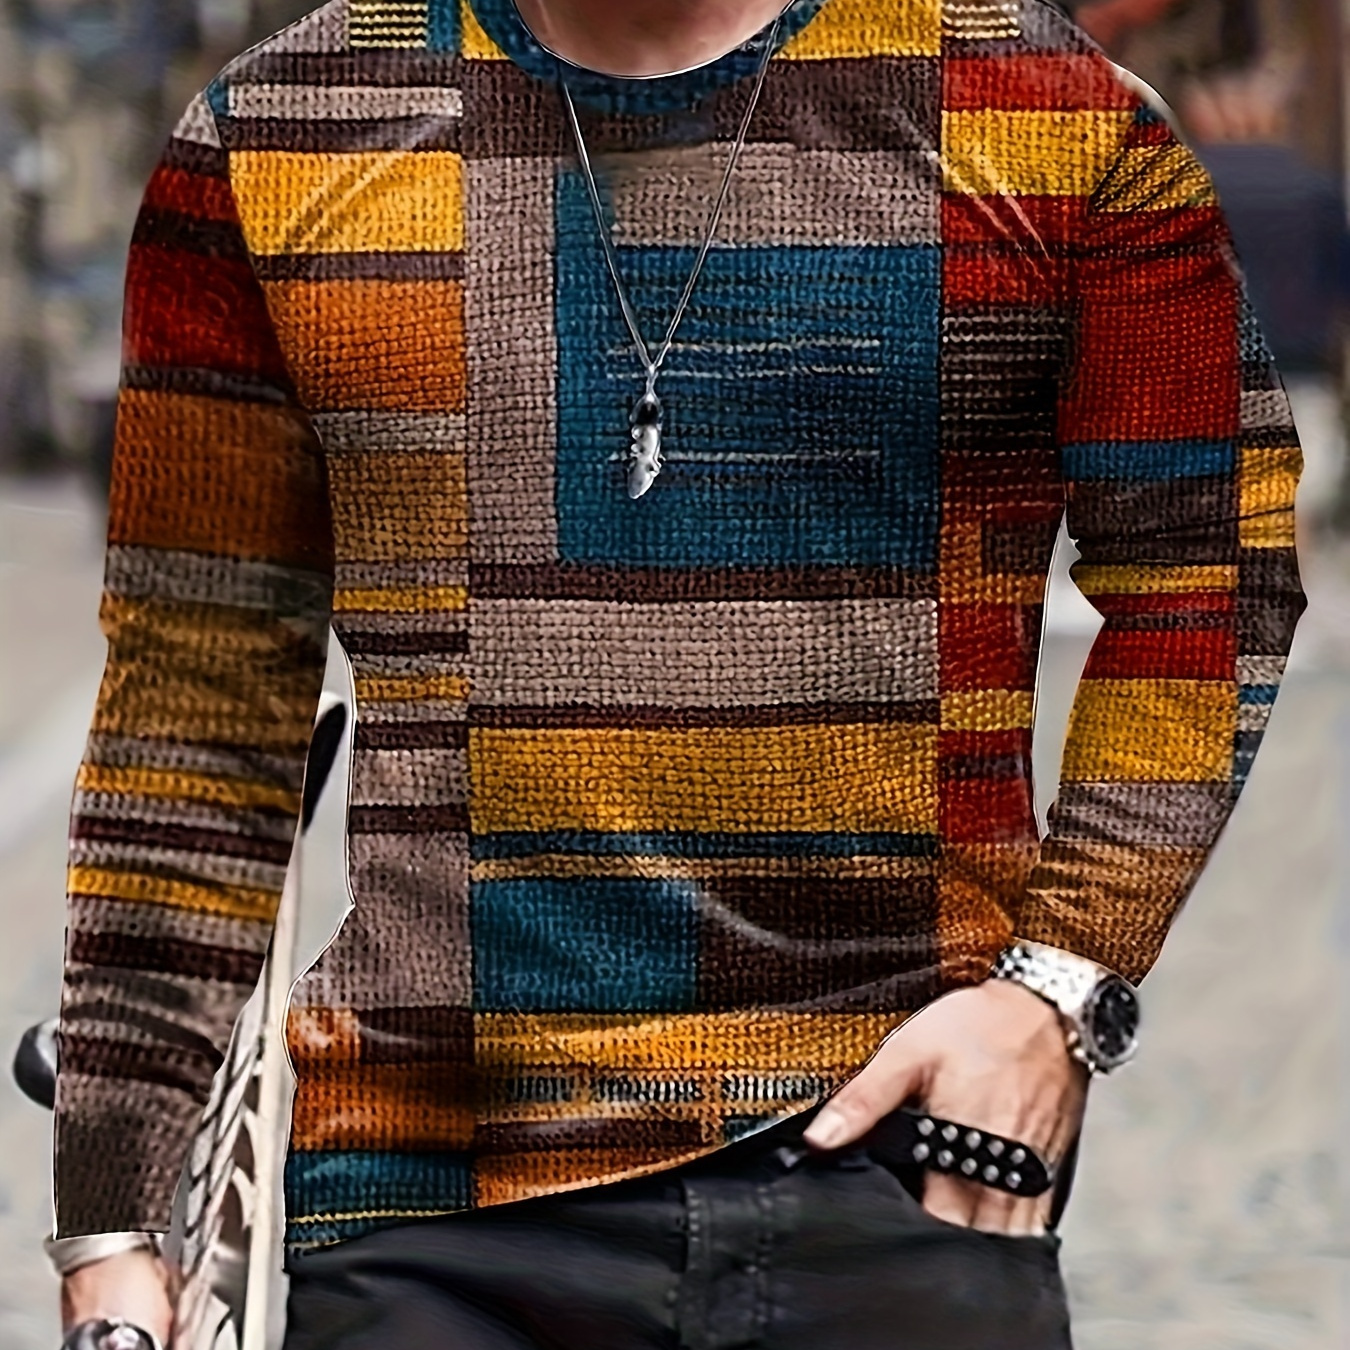 

Men's Colorful And Irregular Plaid Pattern Crew Neck And Long Sleeve T-shirt, Tops For Spring And Autumn Outdoors And Sports Wear